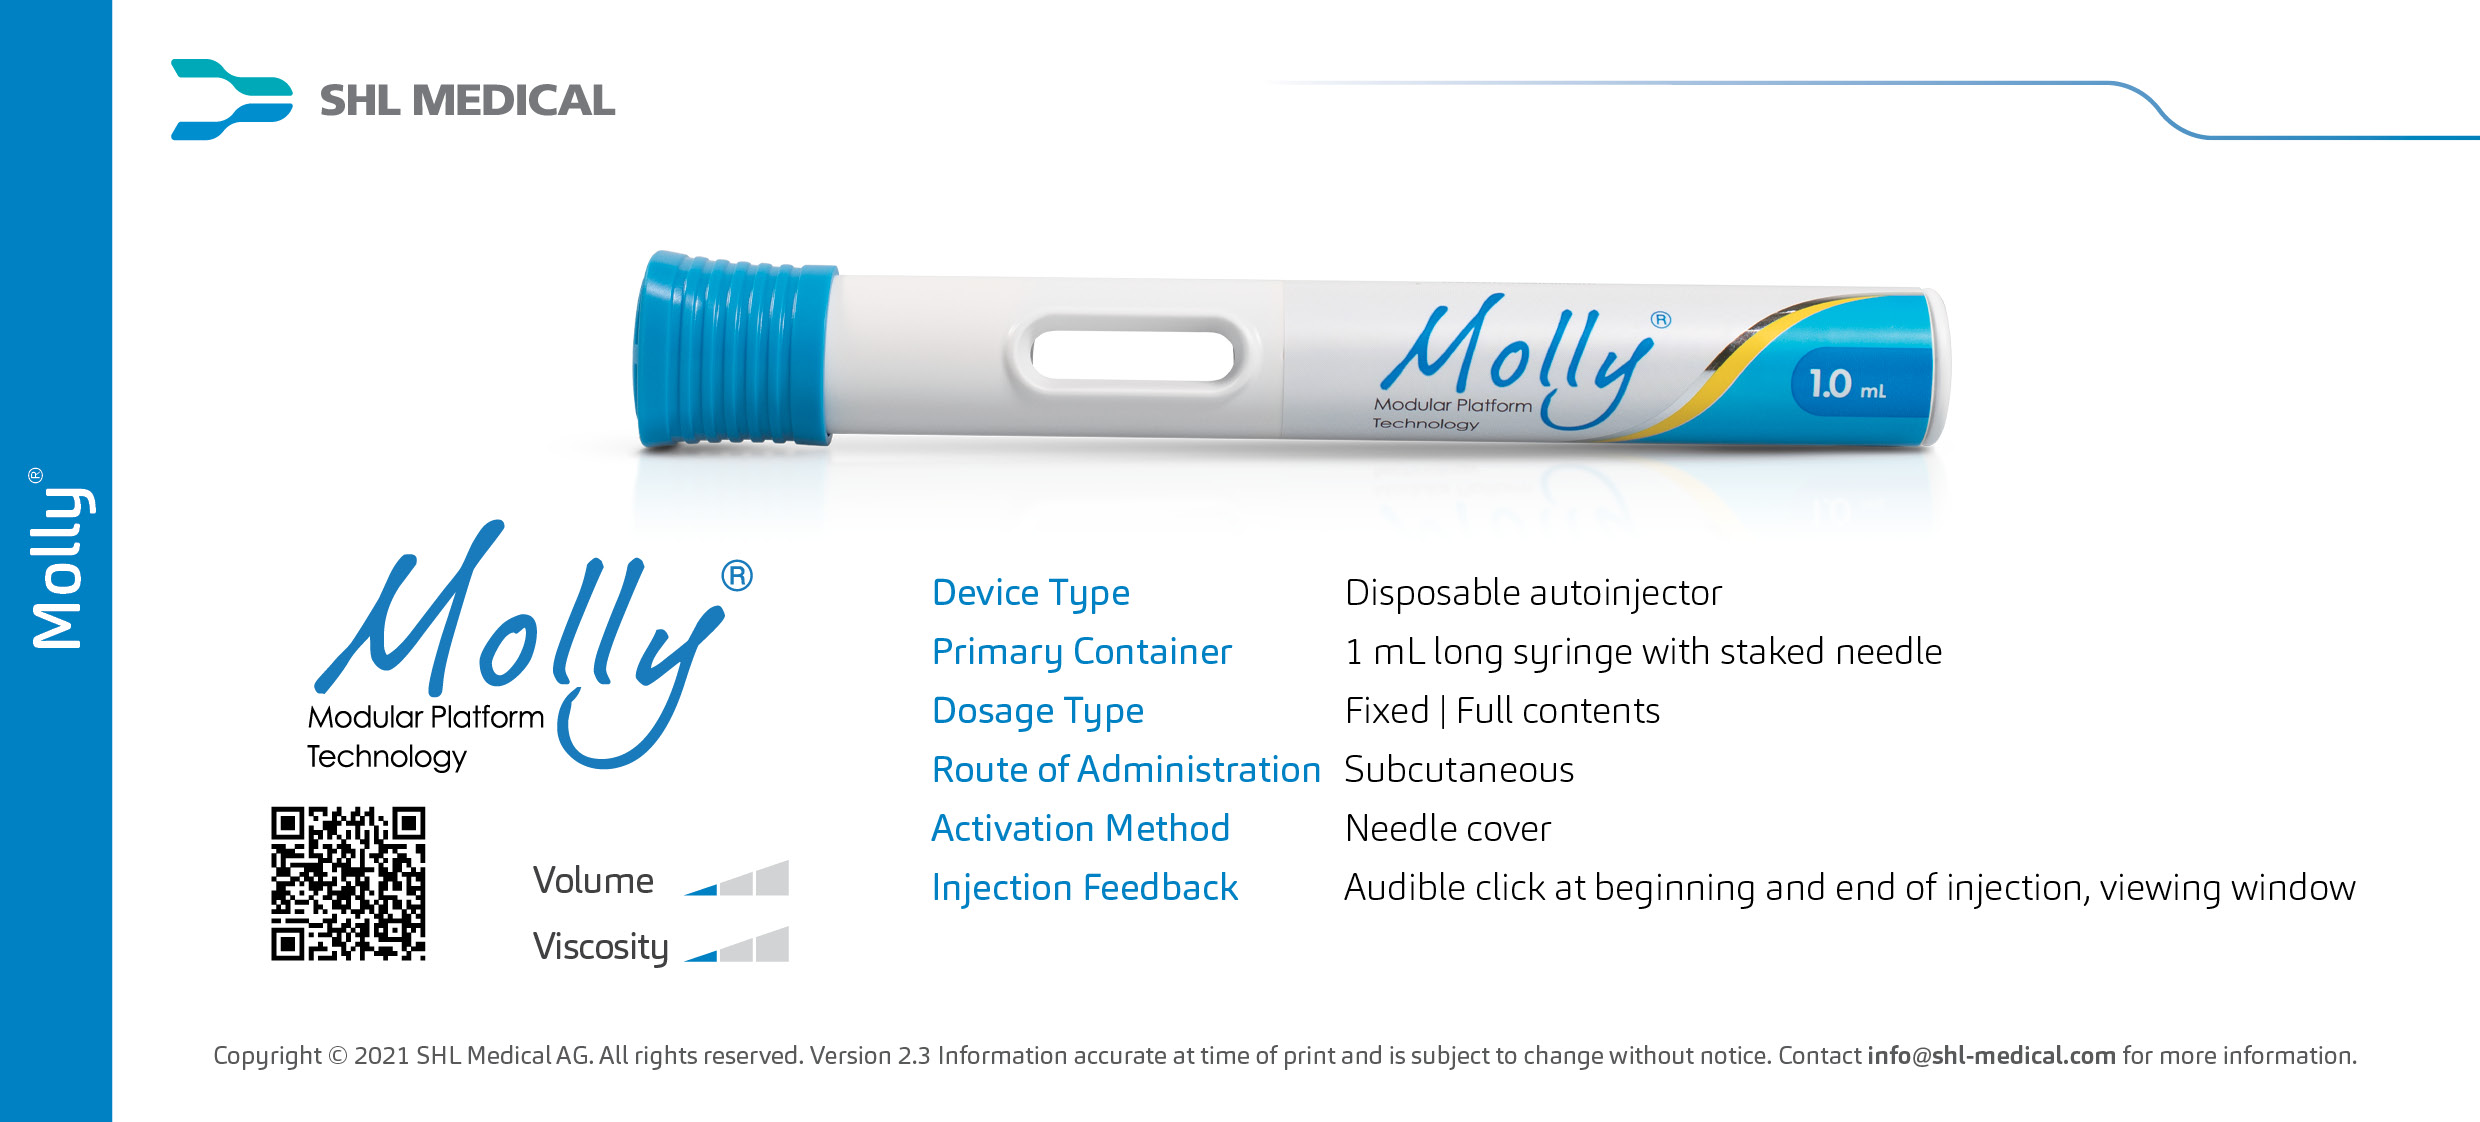 Image of standard Molly 1.0 autoinjector developed by SHL Medical along with its specifications and handling instruction